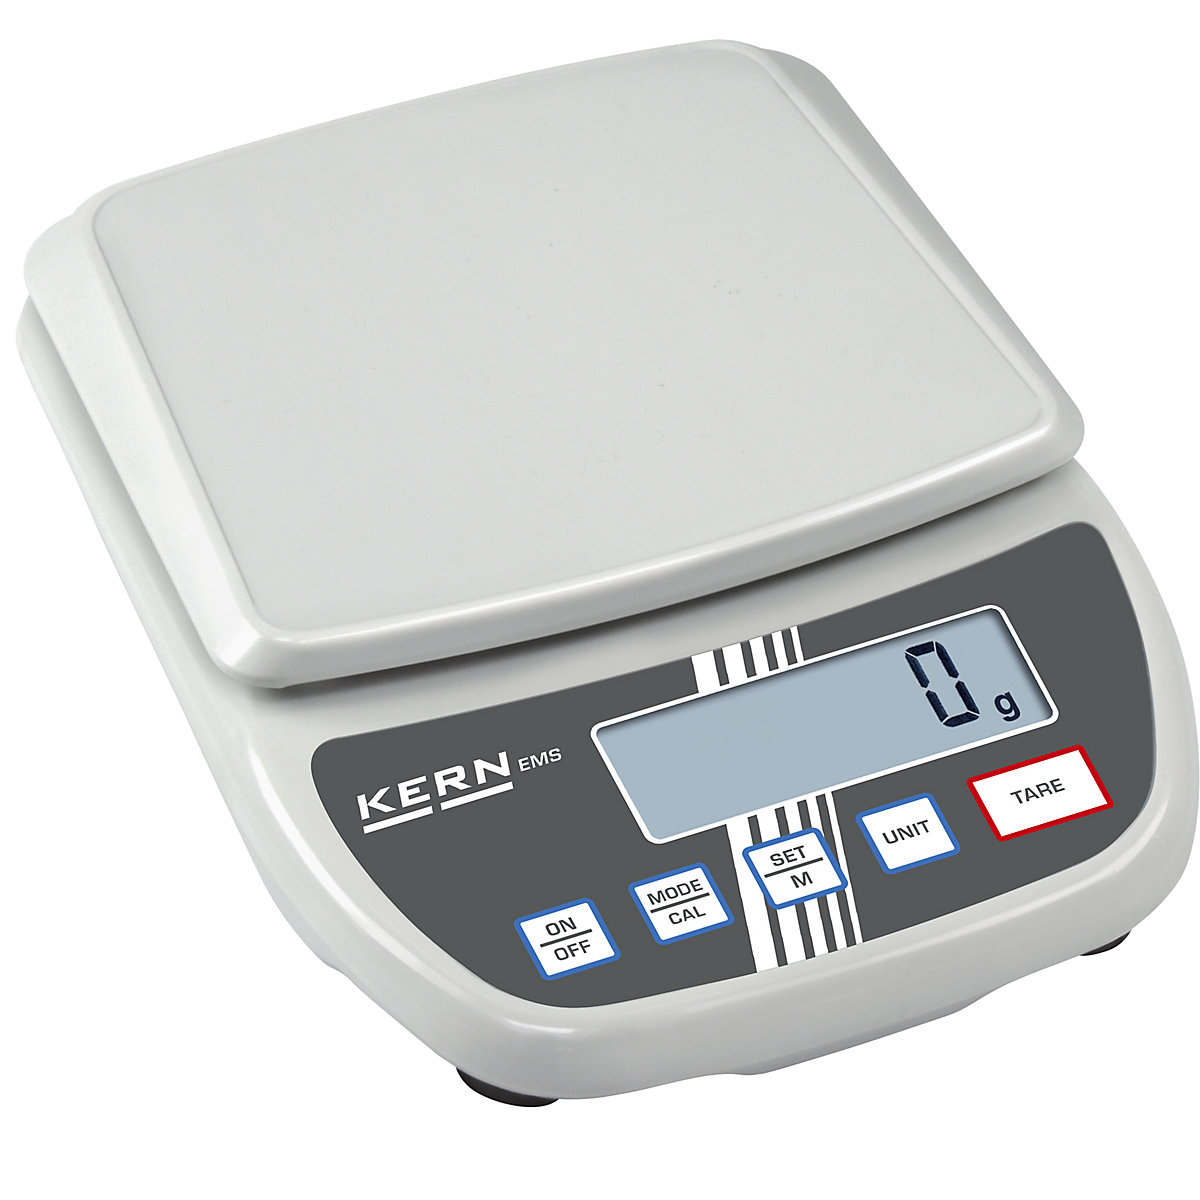 Compact scales - KERN